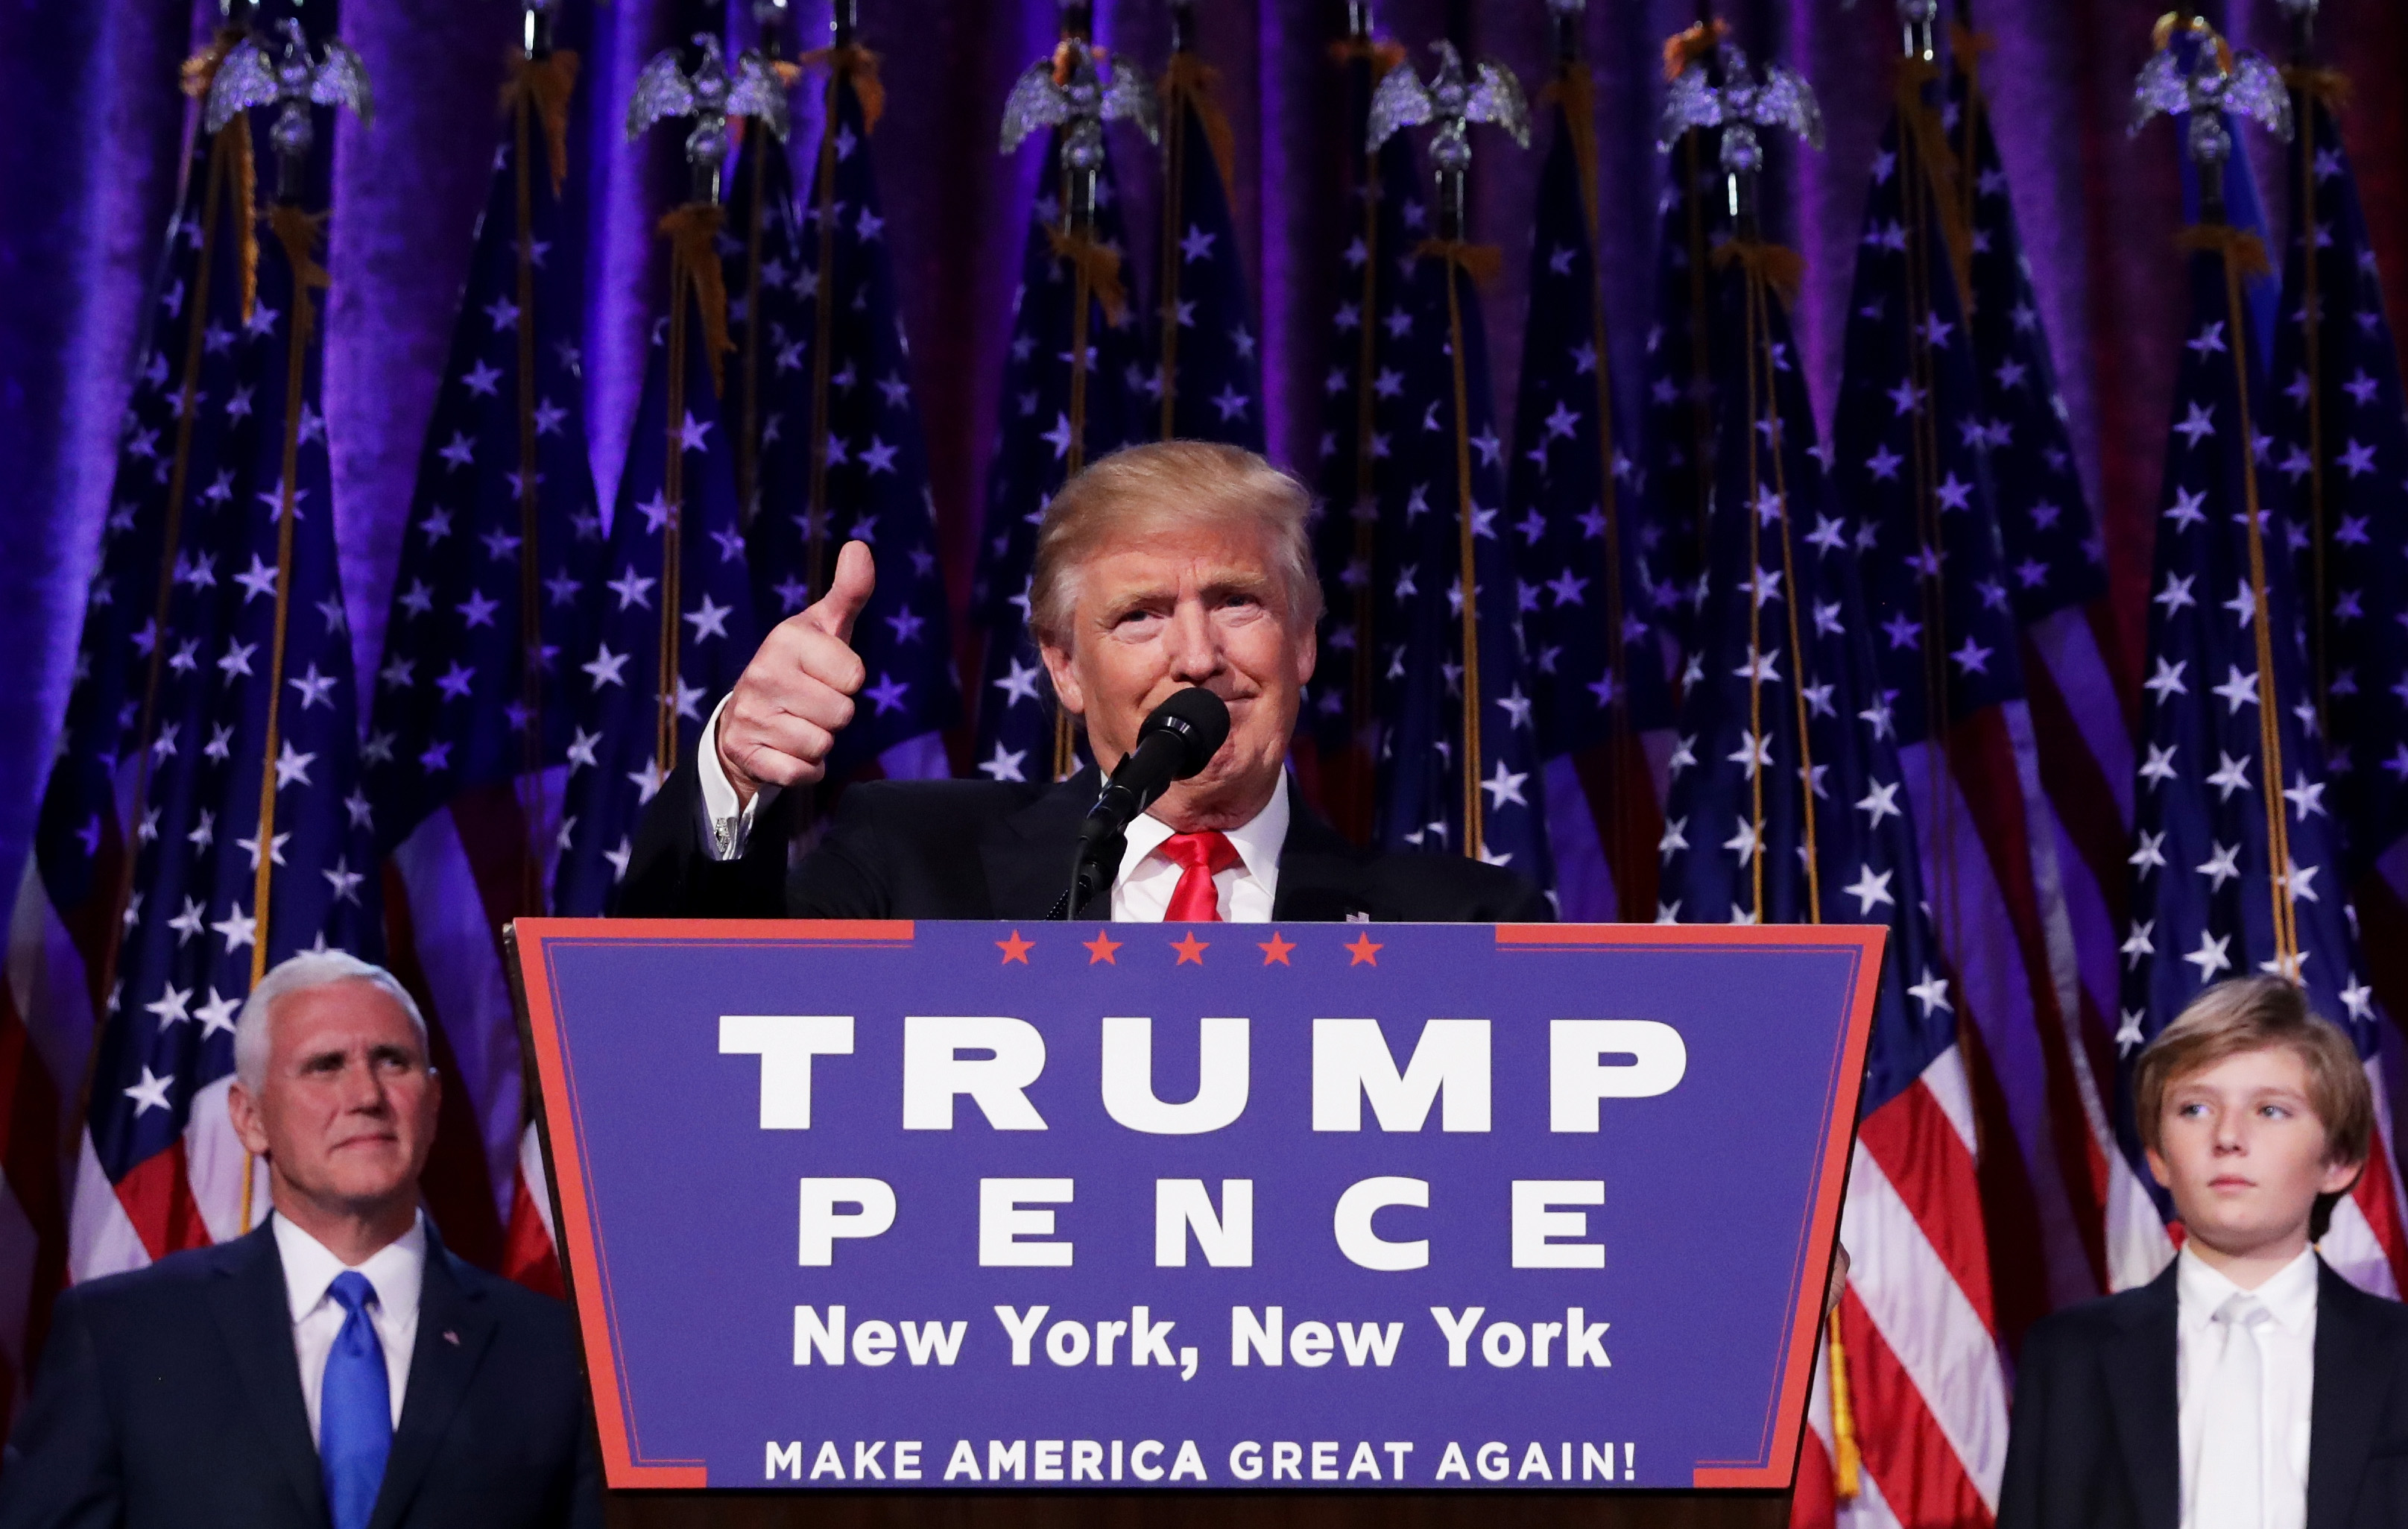 Republican president-elect Donald Trump gives a thumbs up to the crowd during his acceptance speech at his election night event in New York. 